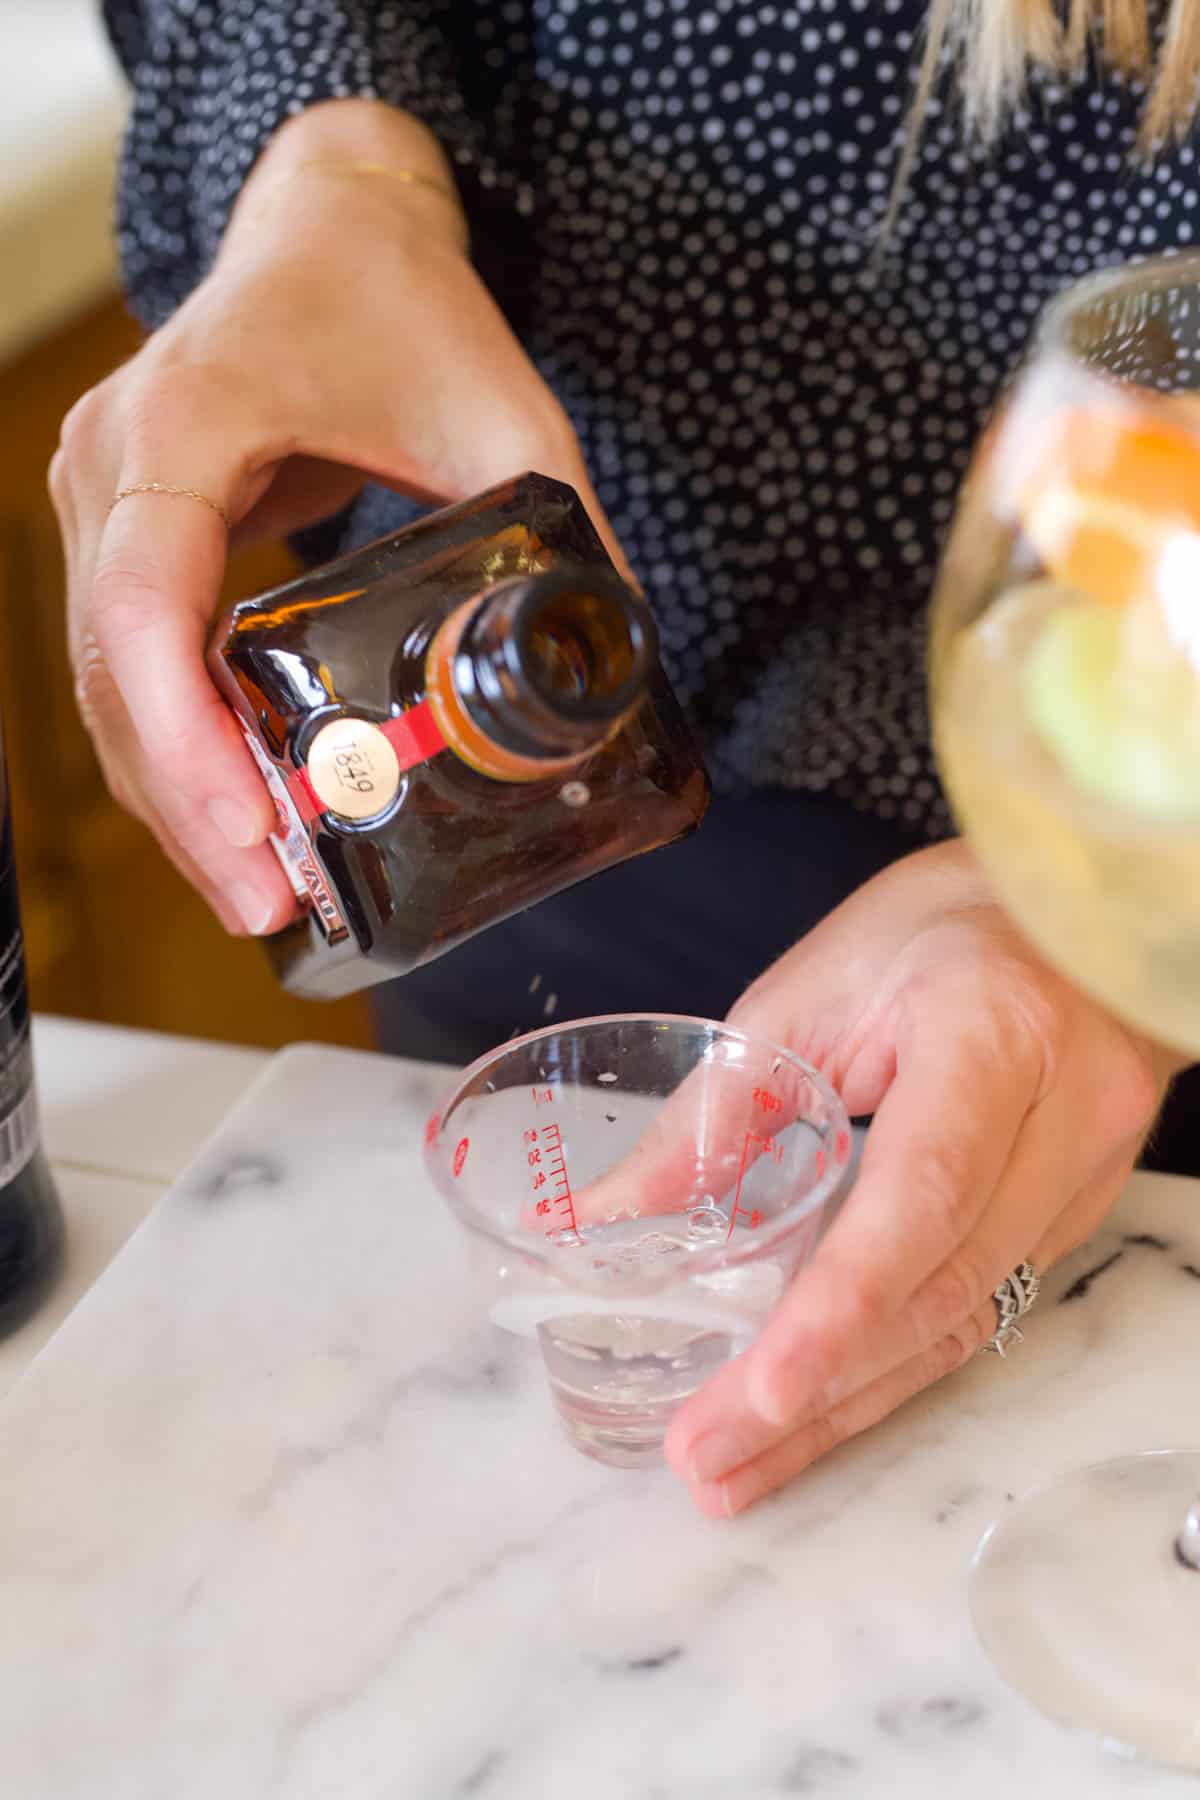 Woman adding Cointreau to a measuring cup.